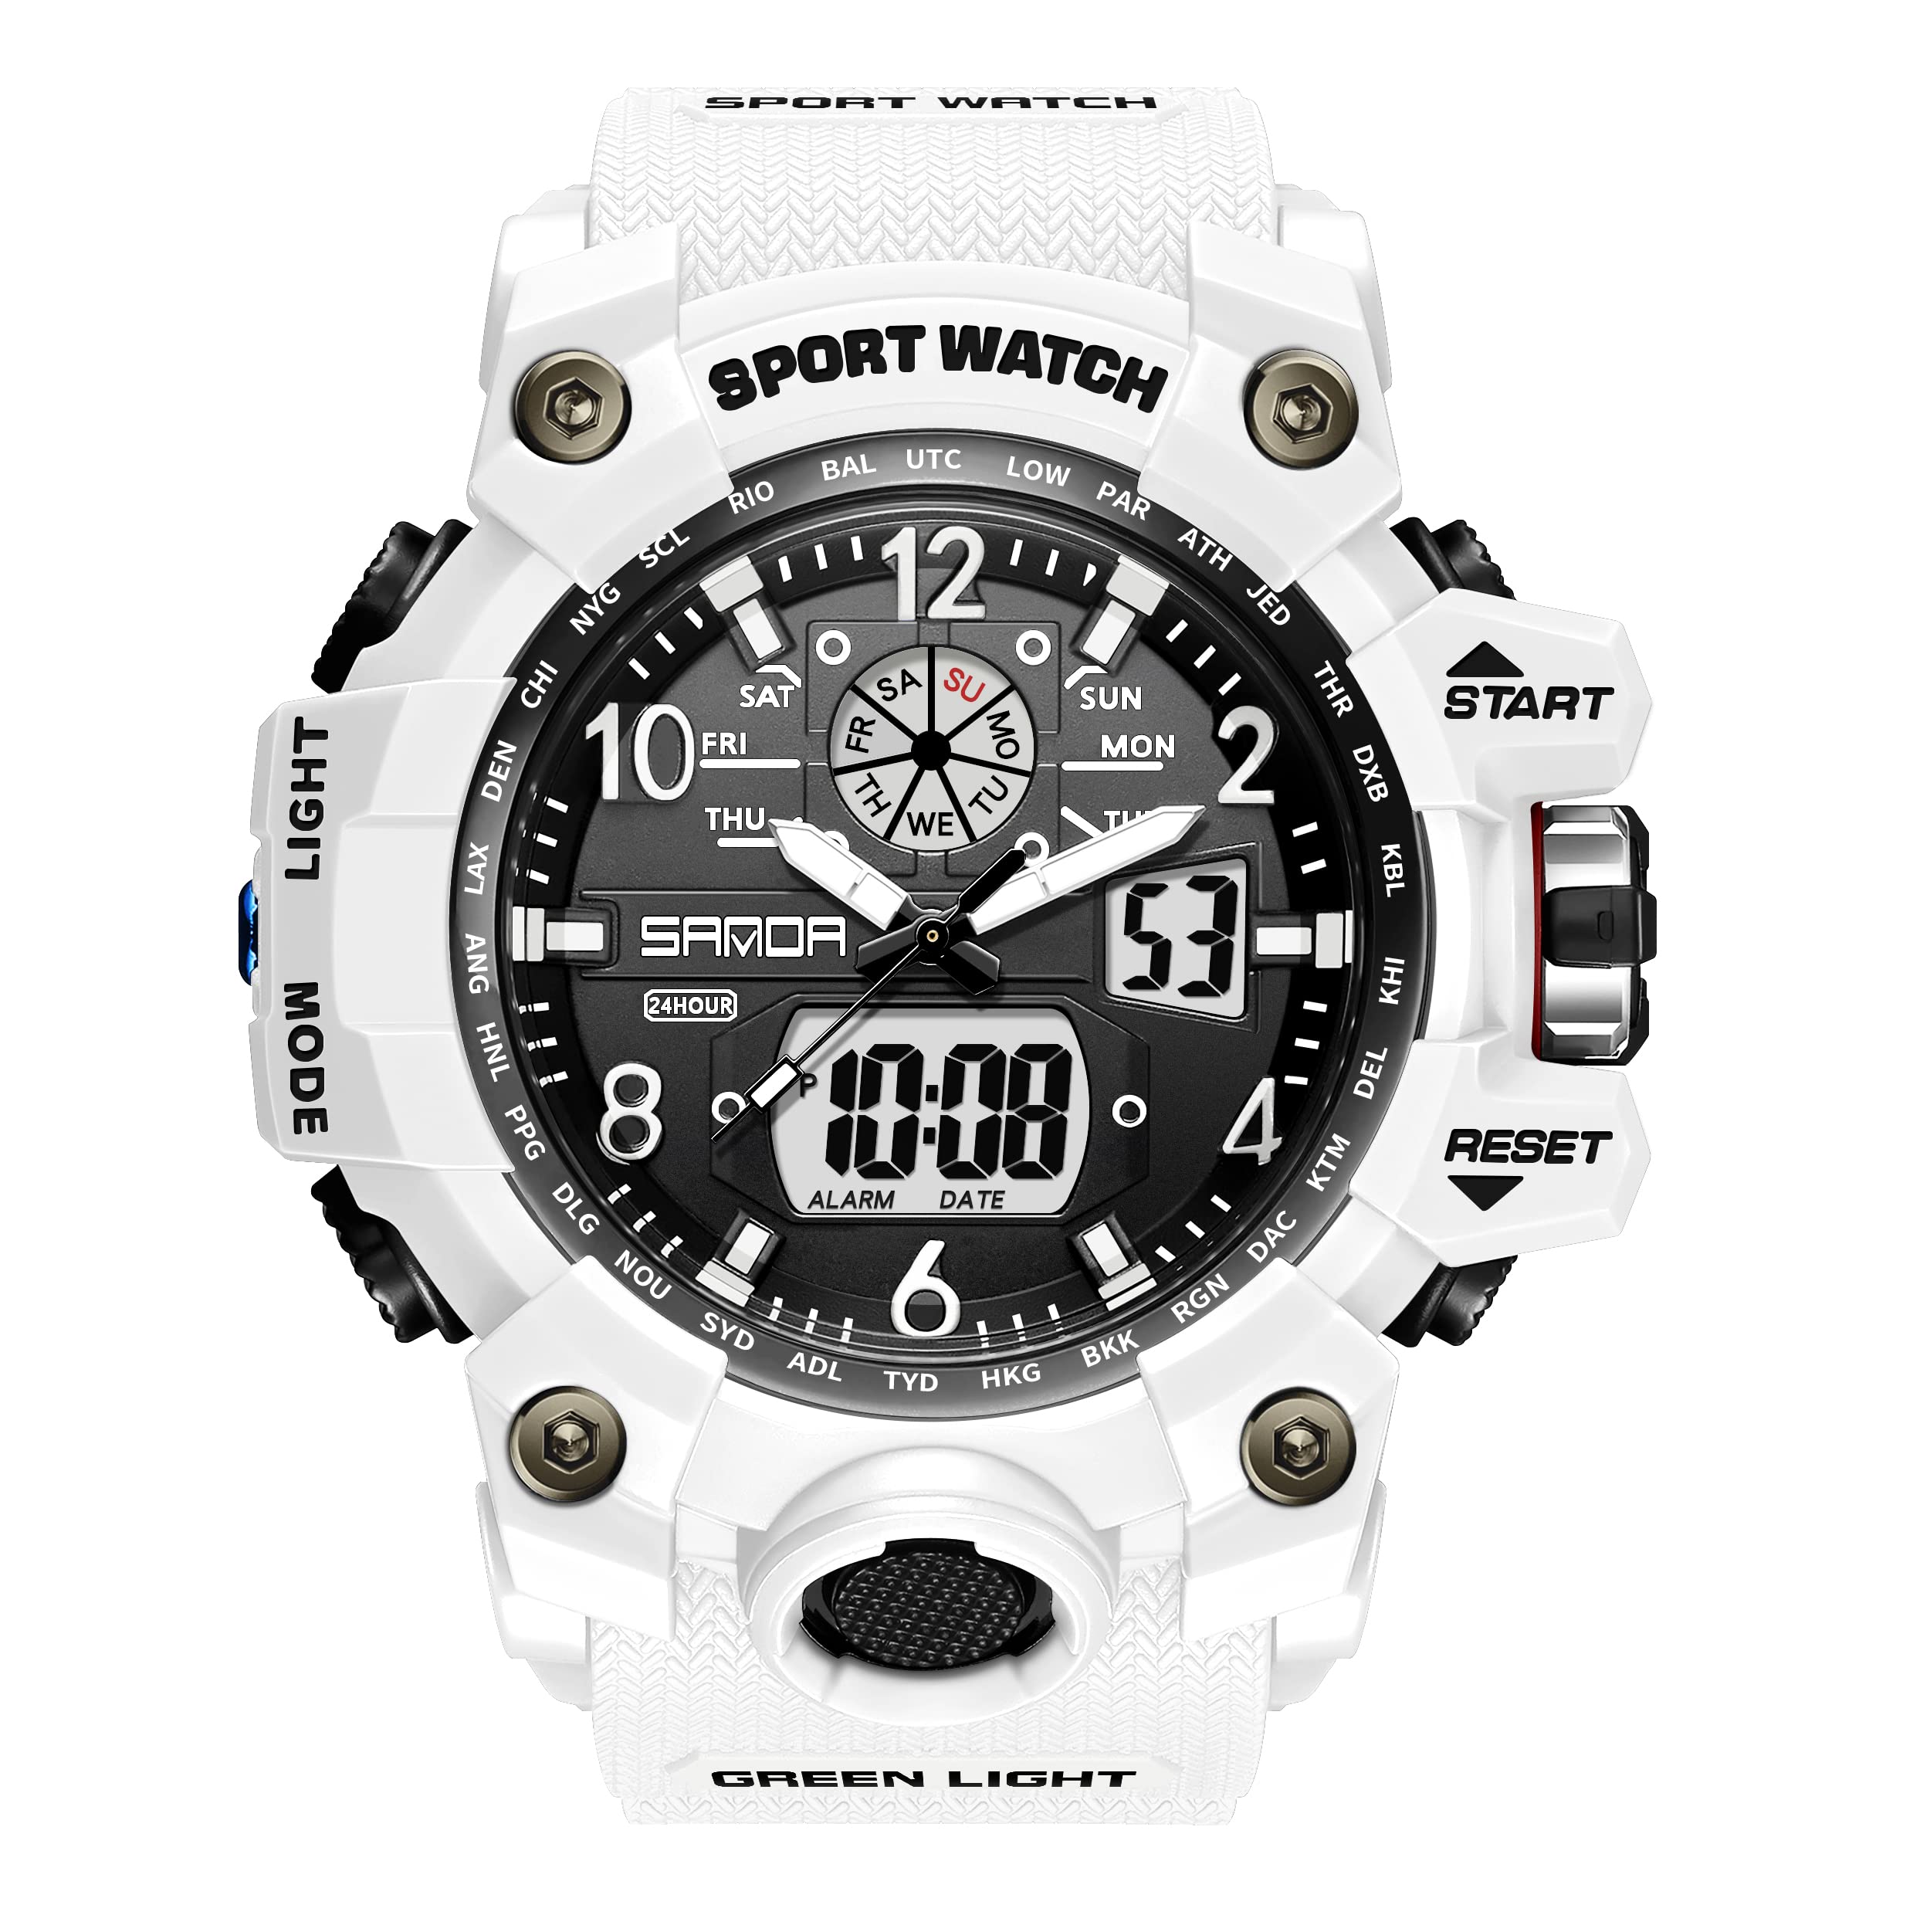 KXAITO Men's Watches Sports Outdoor Waterproof Military Wrist Watch Date Multi Function Tactics LED Alarm Stopwatch 3169